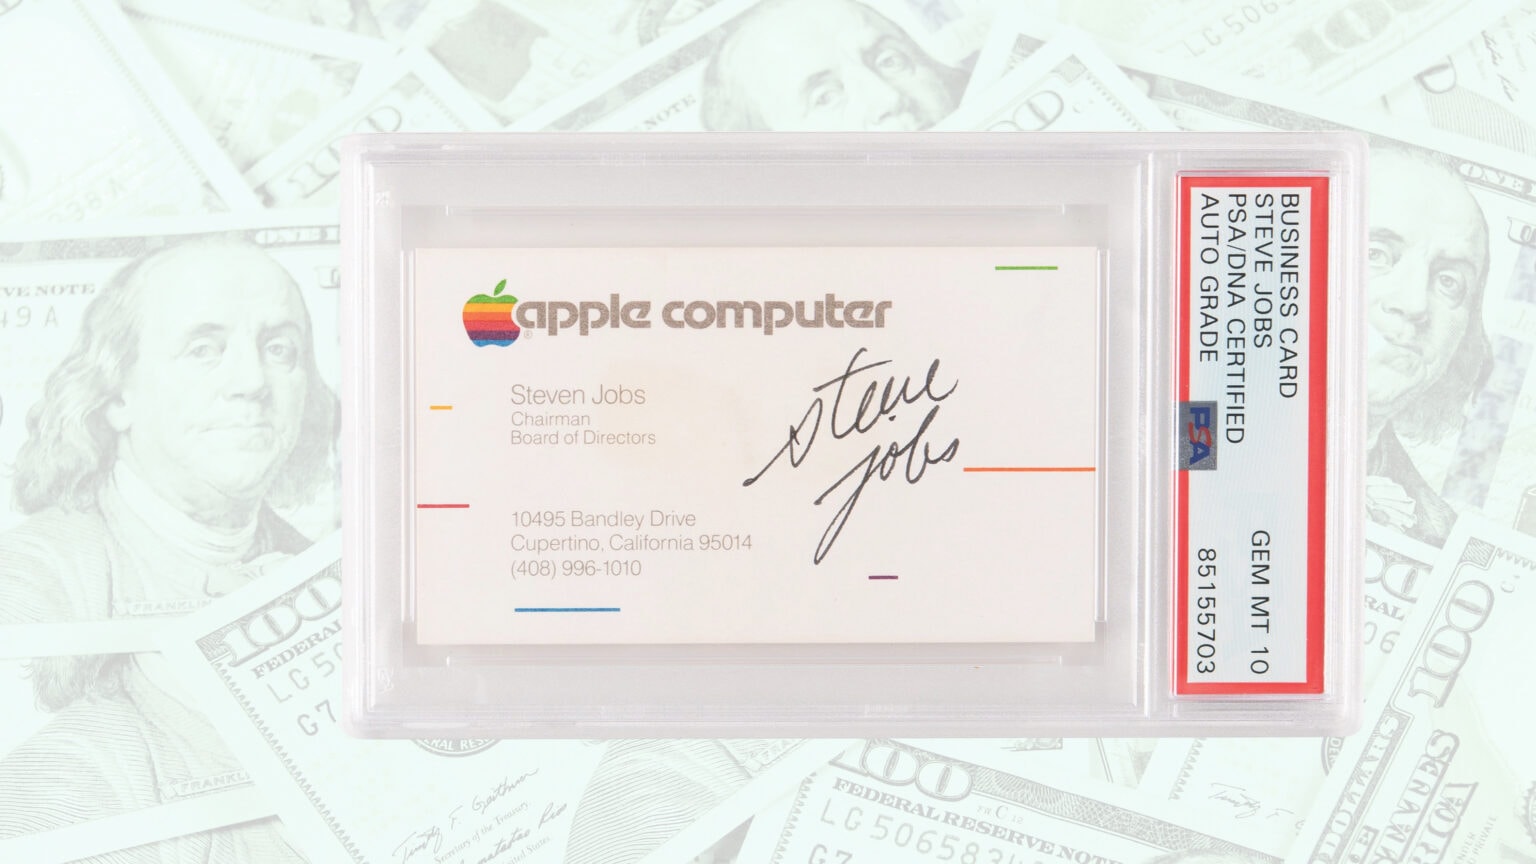 Would you pay 0,000 for Steve Jobs’ business card?